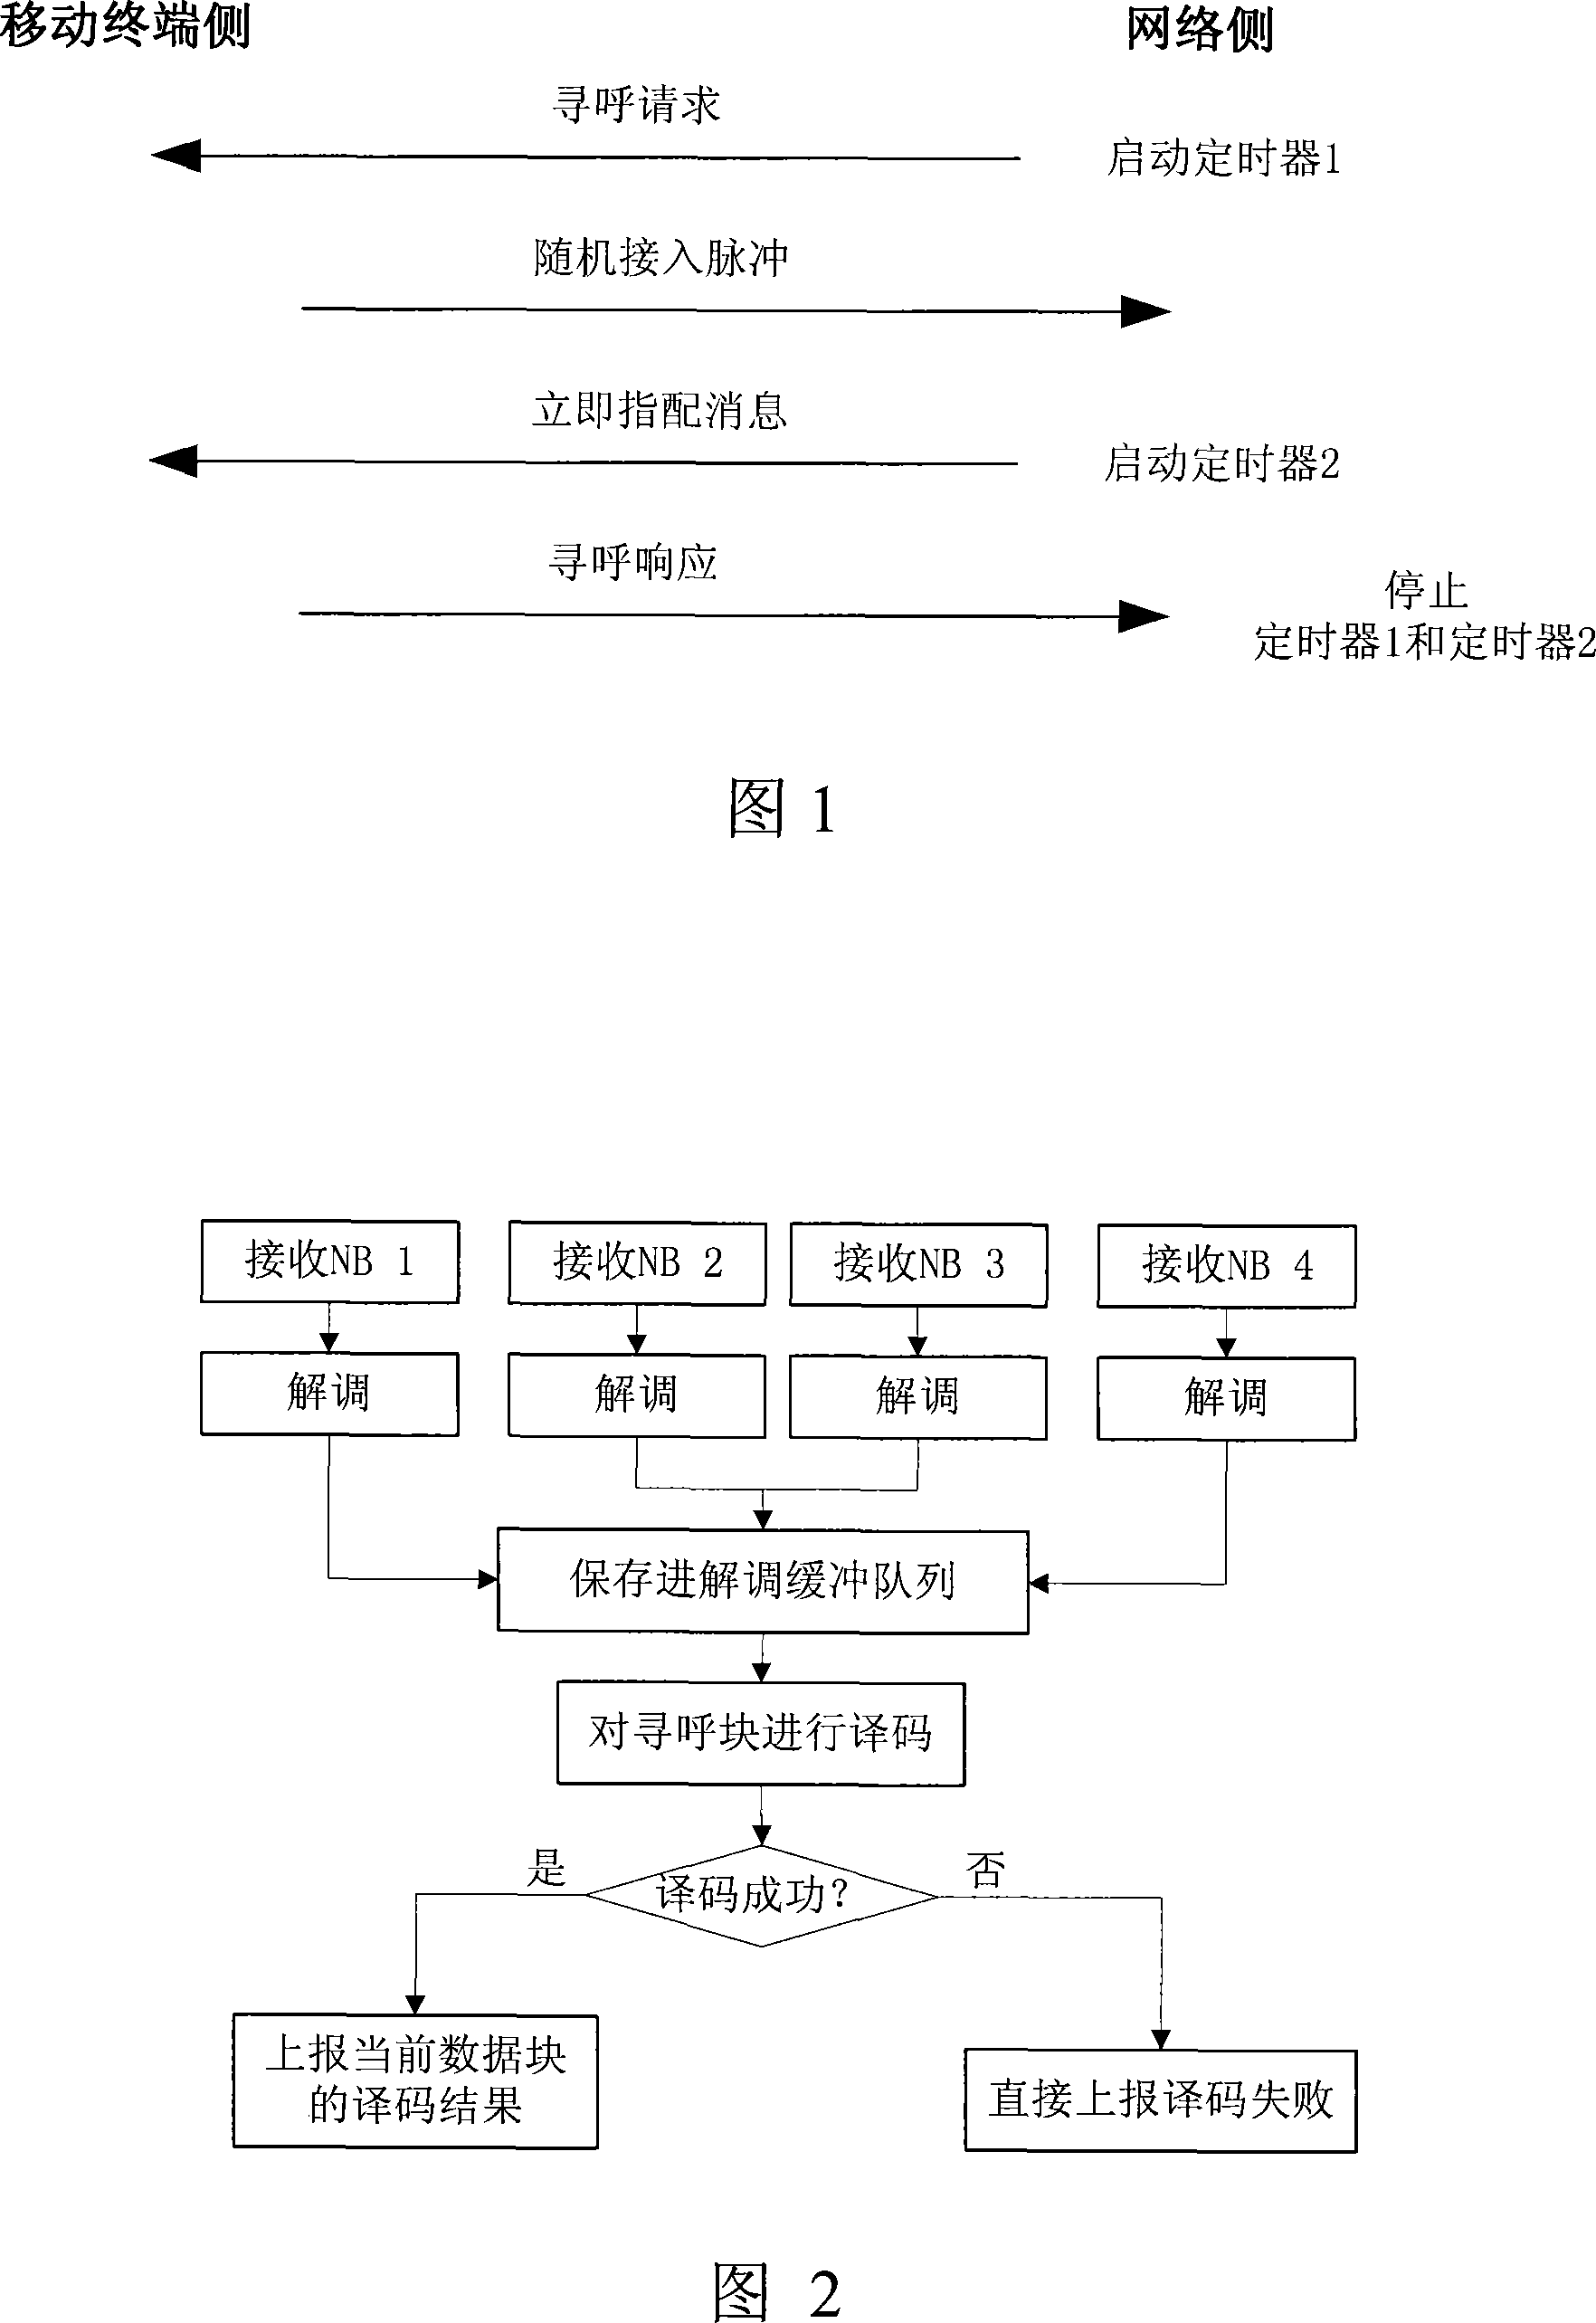 A message processing method and device